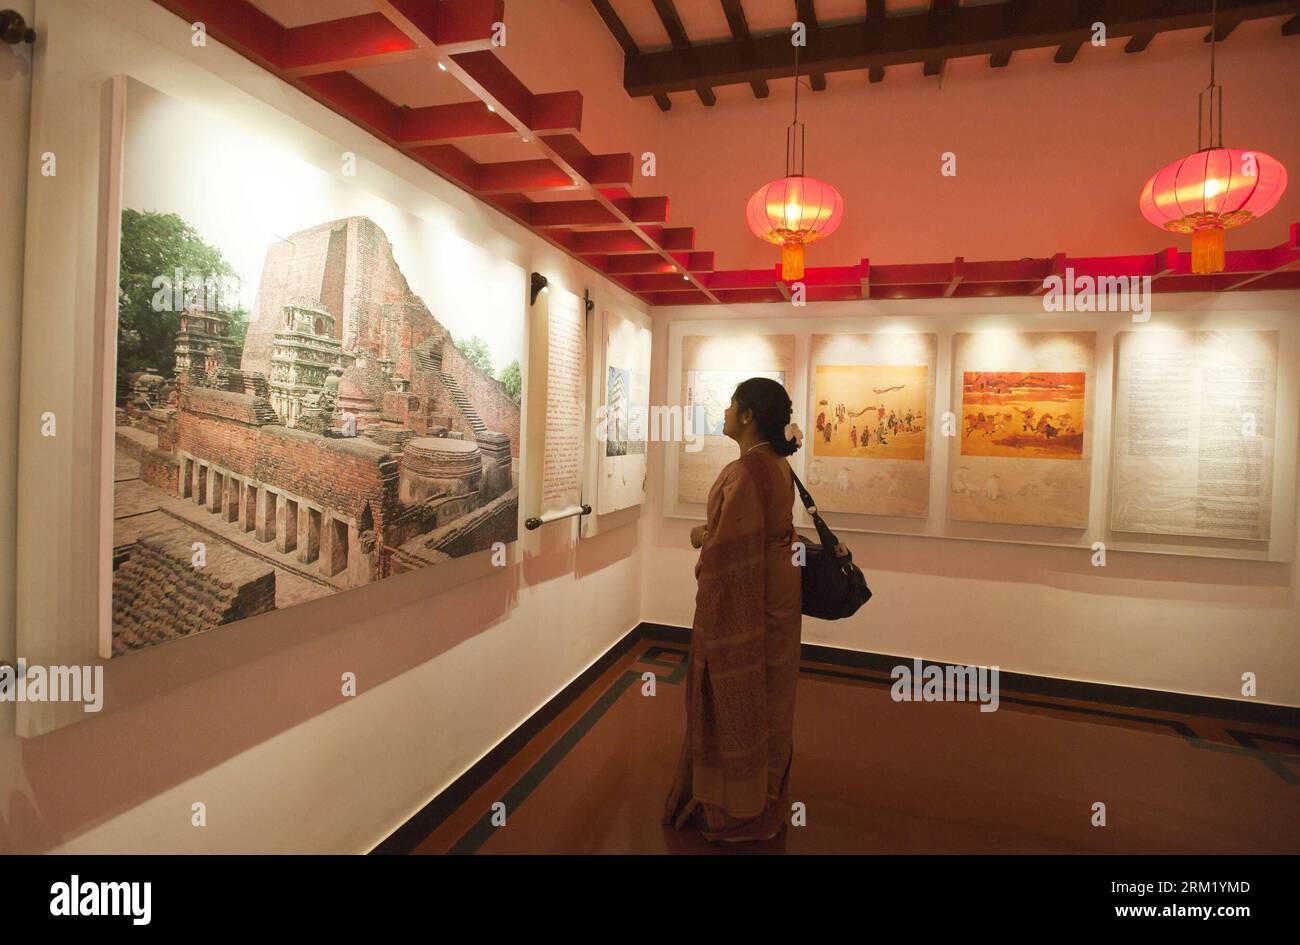 Bildnummer: 59652958  Datum: 15.05.2013  Copyright: imago/Xinhua (130516) -- KOLKATA, May 2013 (Xinhua) -- An Indian woman views pictures during the inauguration of a China gallery at the Nobel laureate poet Rabindranath Tagore s house in Kolkata, capital of eastern Indian state West Bengal on May, 15, 2013. A prestigious Indian university here on Wednesday opened a gallery about the friendship between legendary Indian poet and philosopher Rabindranath Tagore and China. (Xinhua/Tumpa Mondal) INDIA-KOLKATA-GALLERY INAUGURATION PUBLICATIONxNOTxINxCHN Kultur Ausstellung xbs x0x 2013 quer     5965 Stock Photo